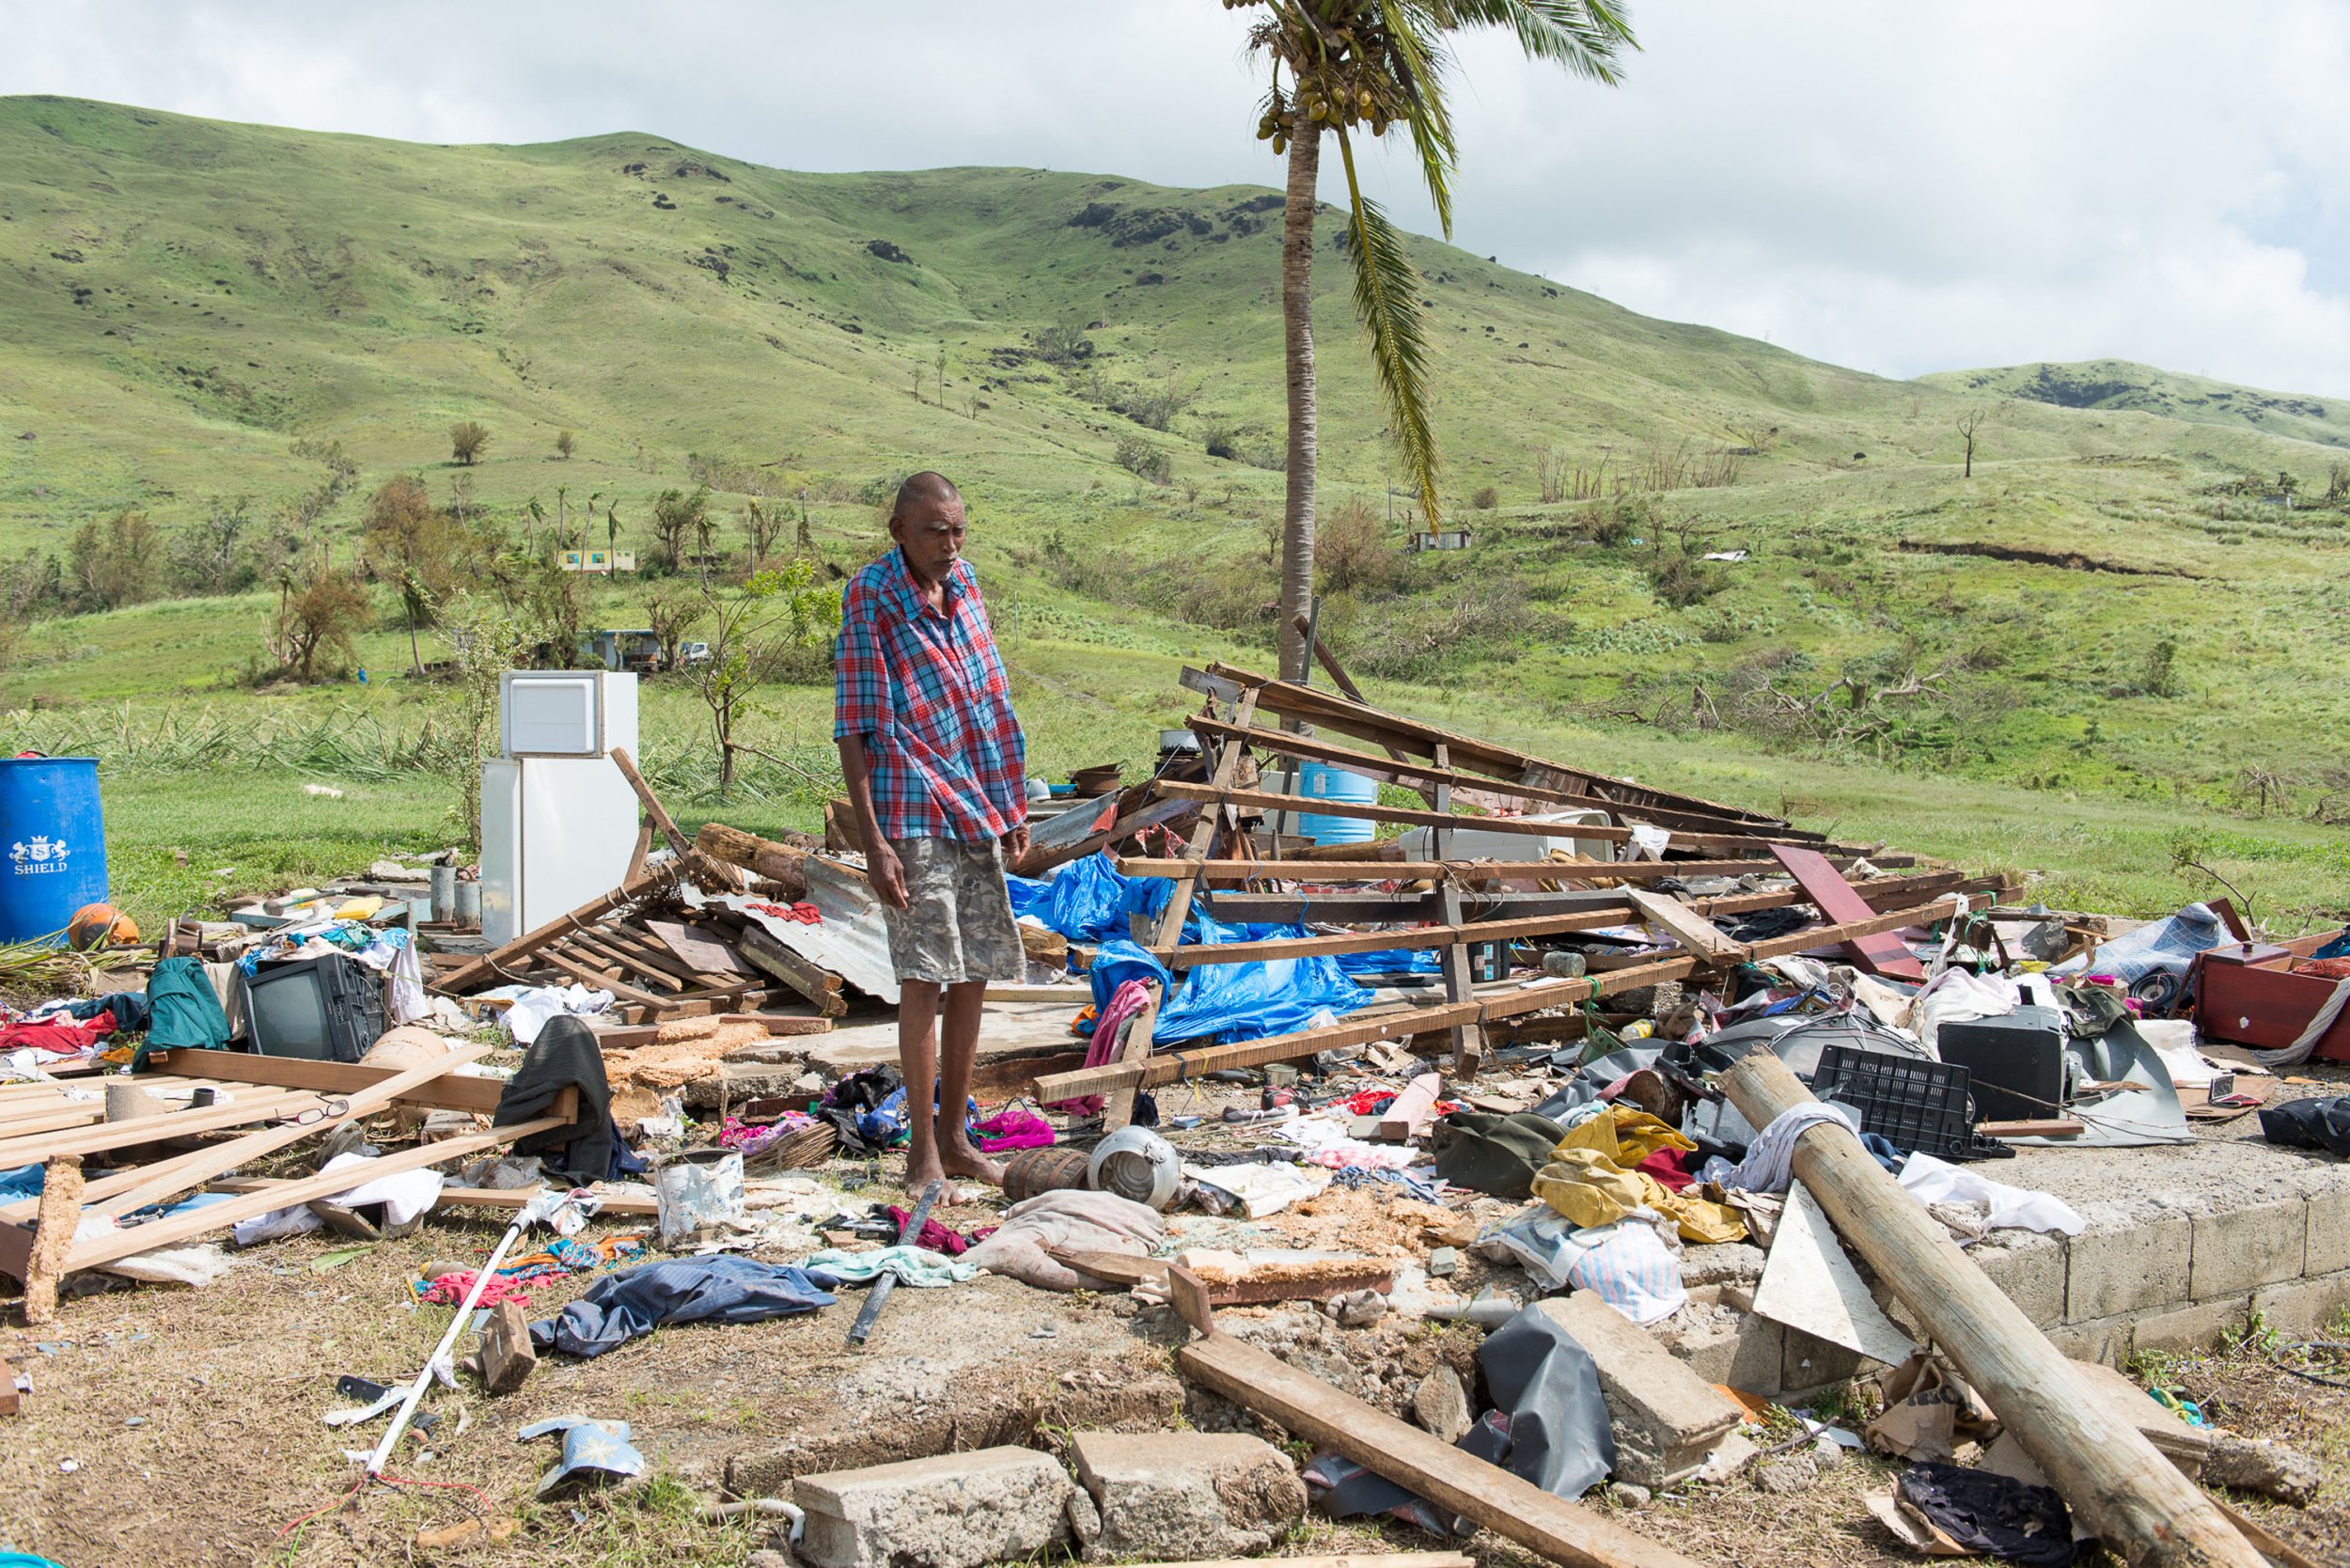 Cyclone Winston Fiji’s Estimated Cost Of Damages Exceeds 470M, 10 Of